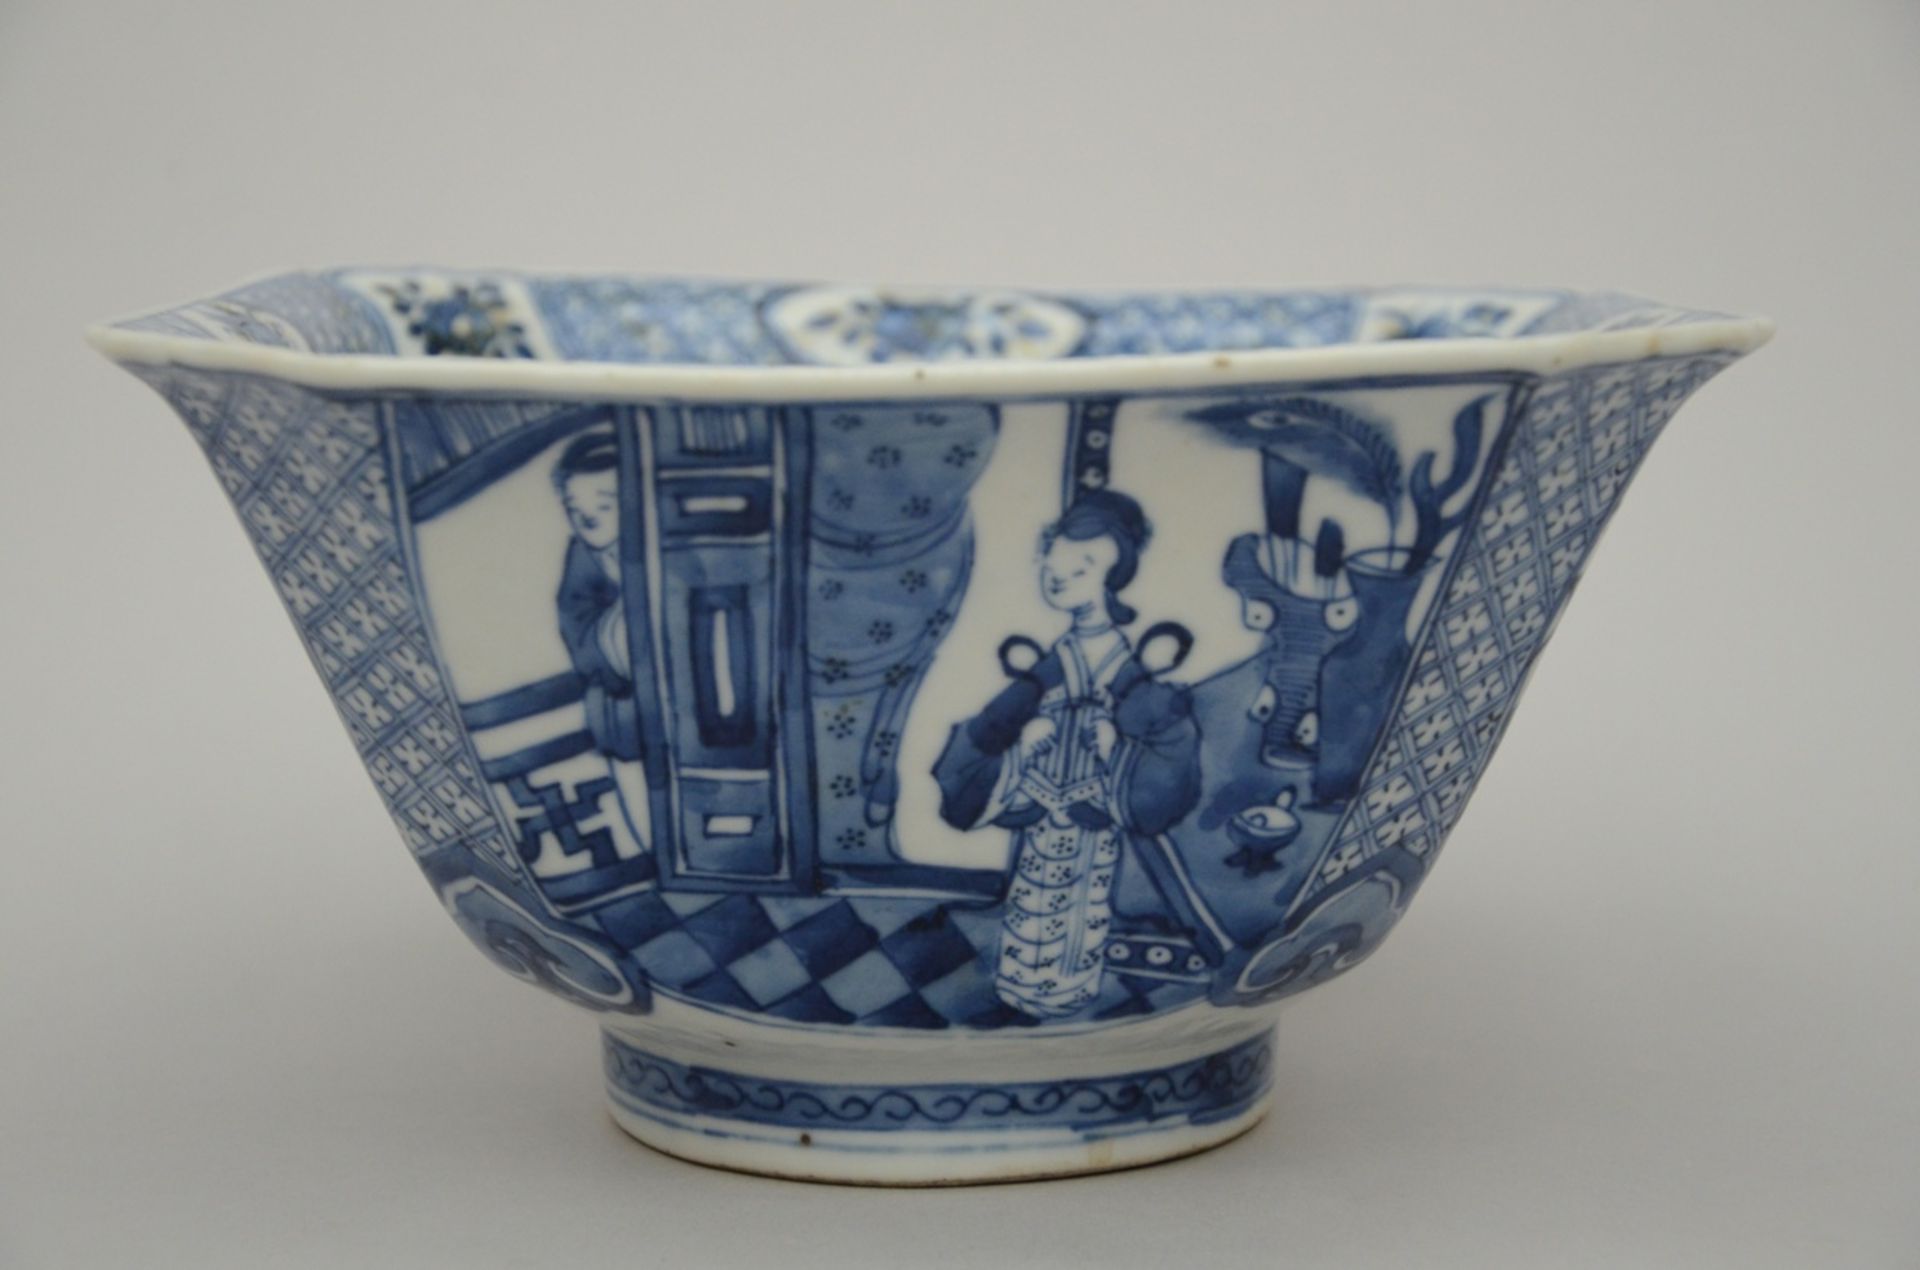 Chinese octagonal bowl in blue and white porcelain 'romantic scenes' 19th century (11.5x21x20.5cm) - Image 2 of 5